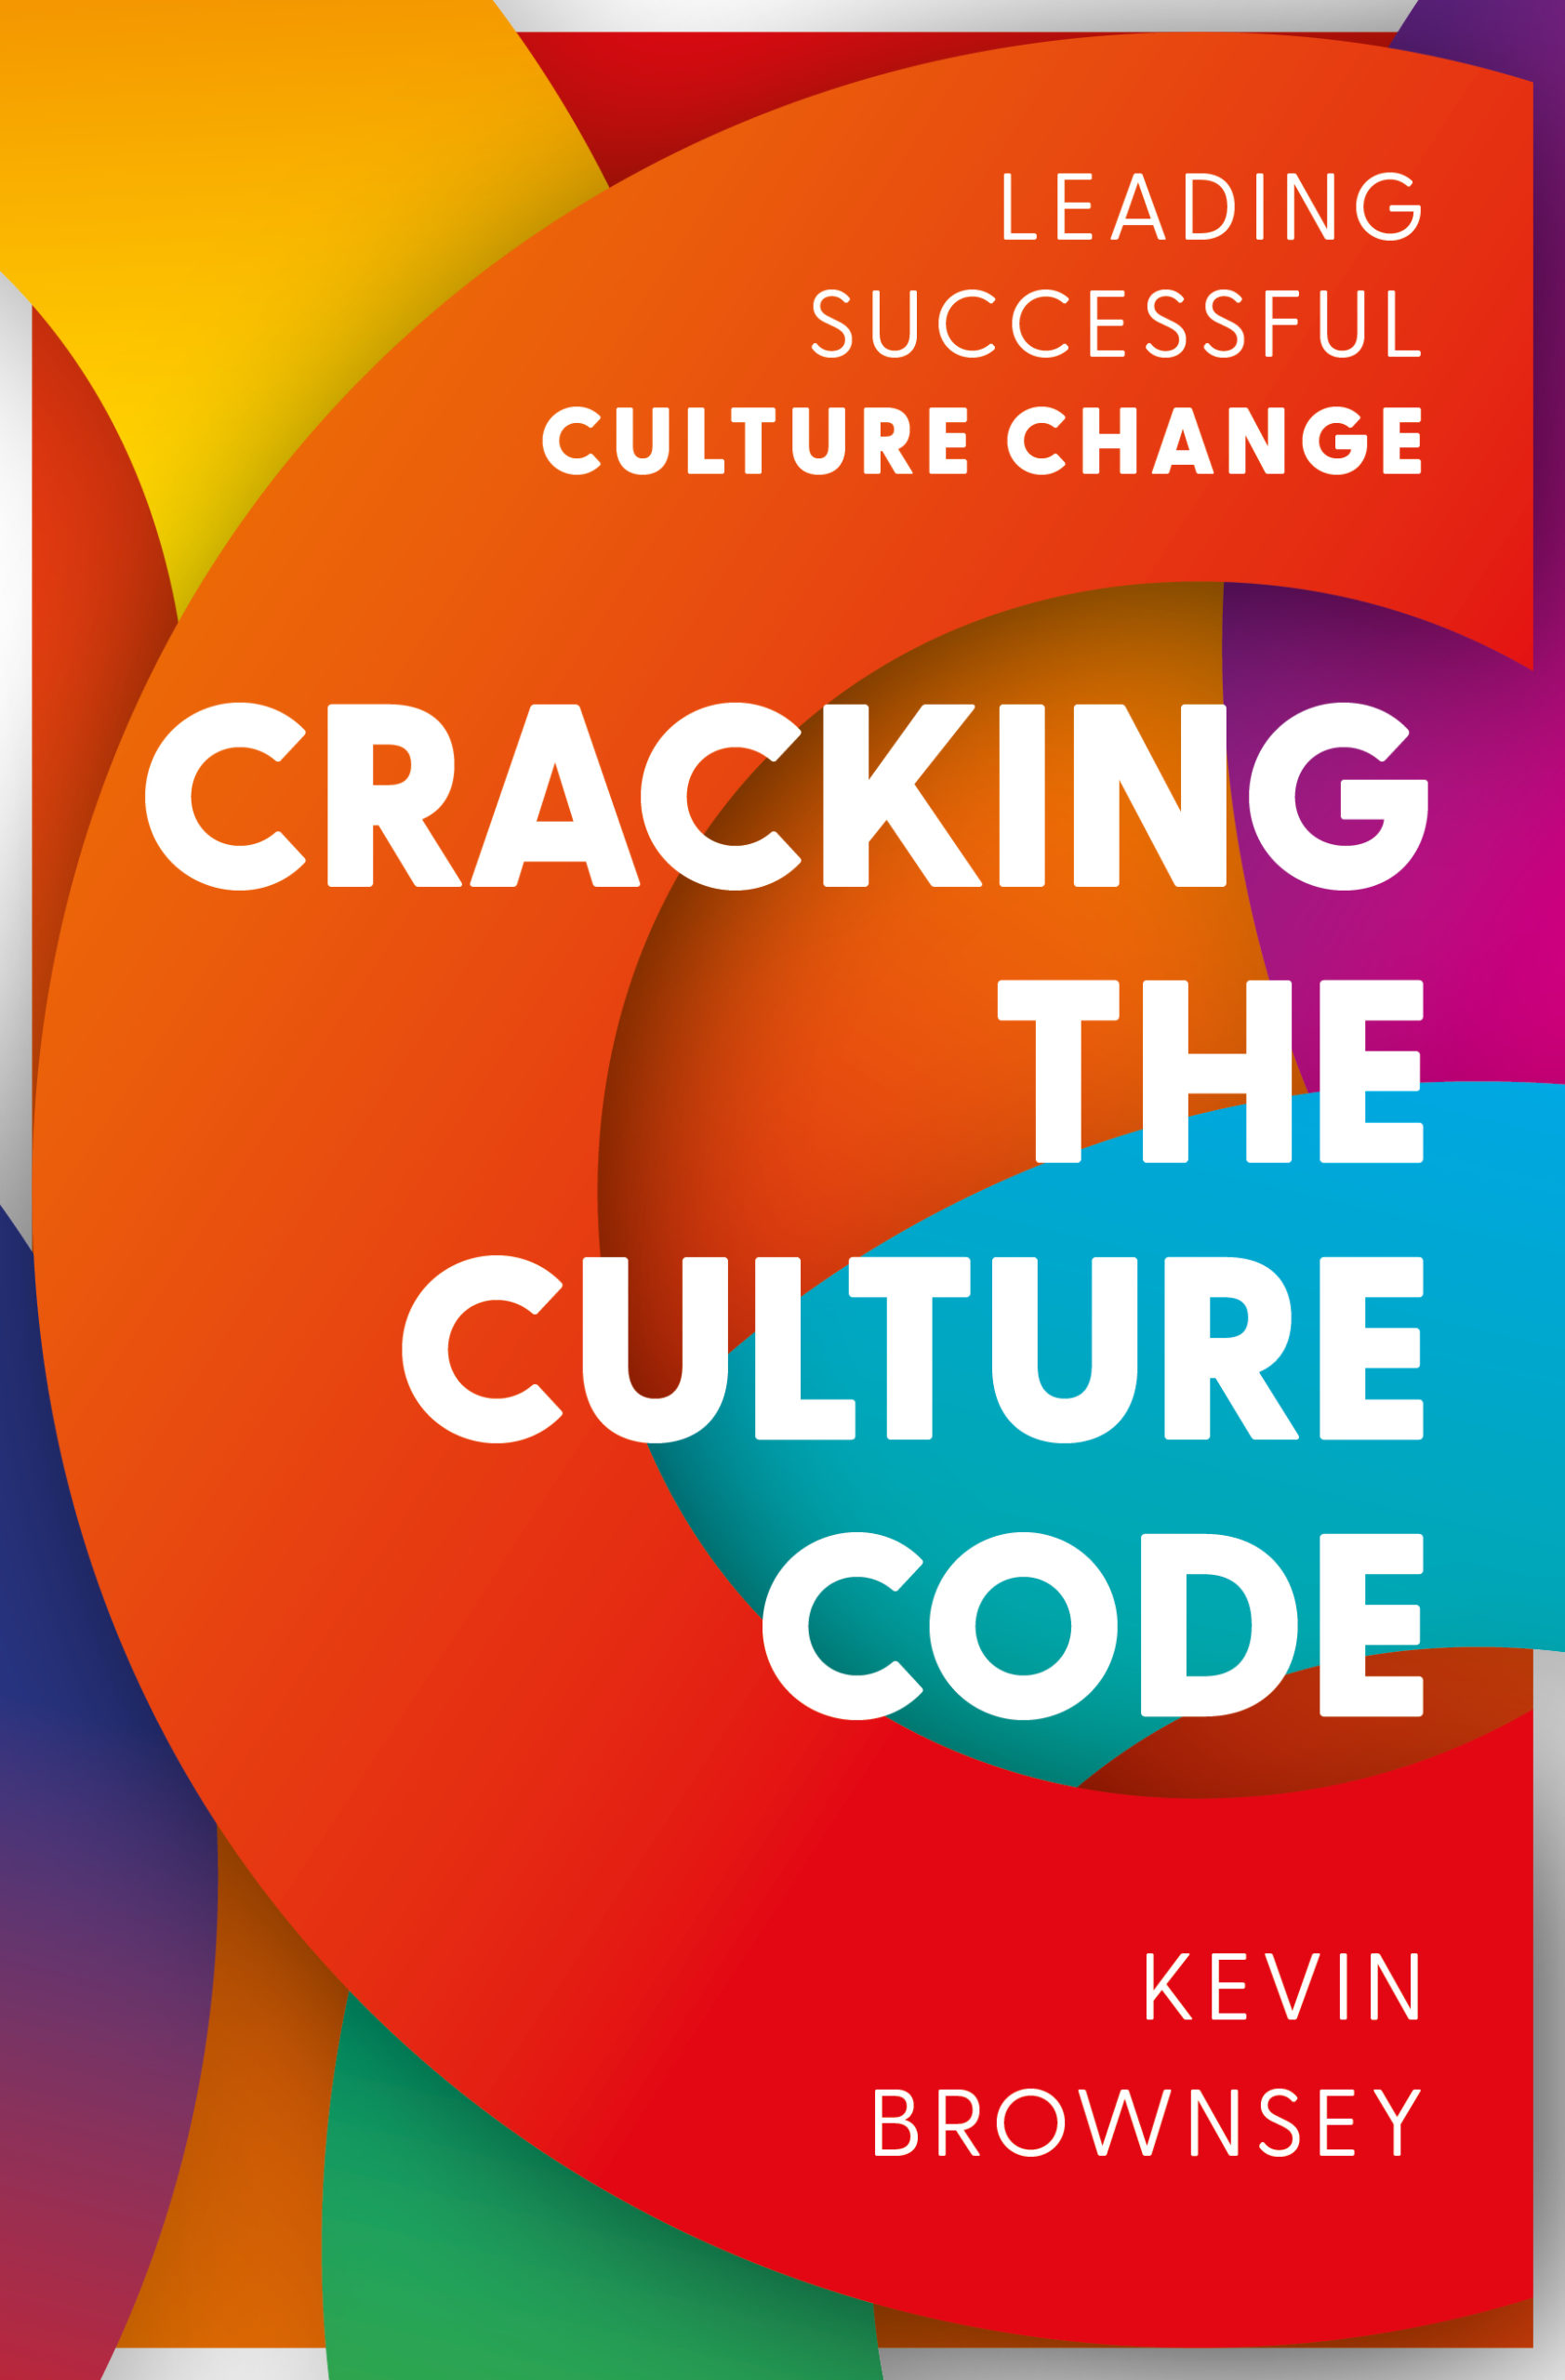 Cracking the Culture Code